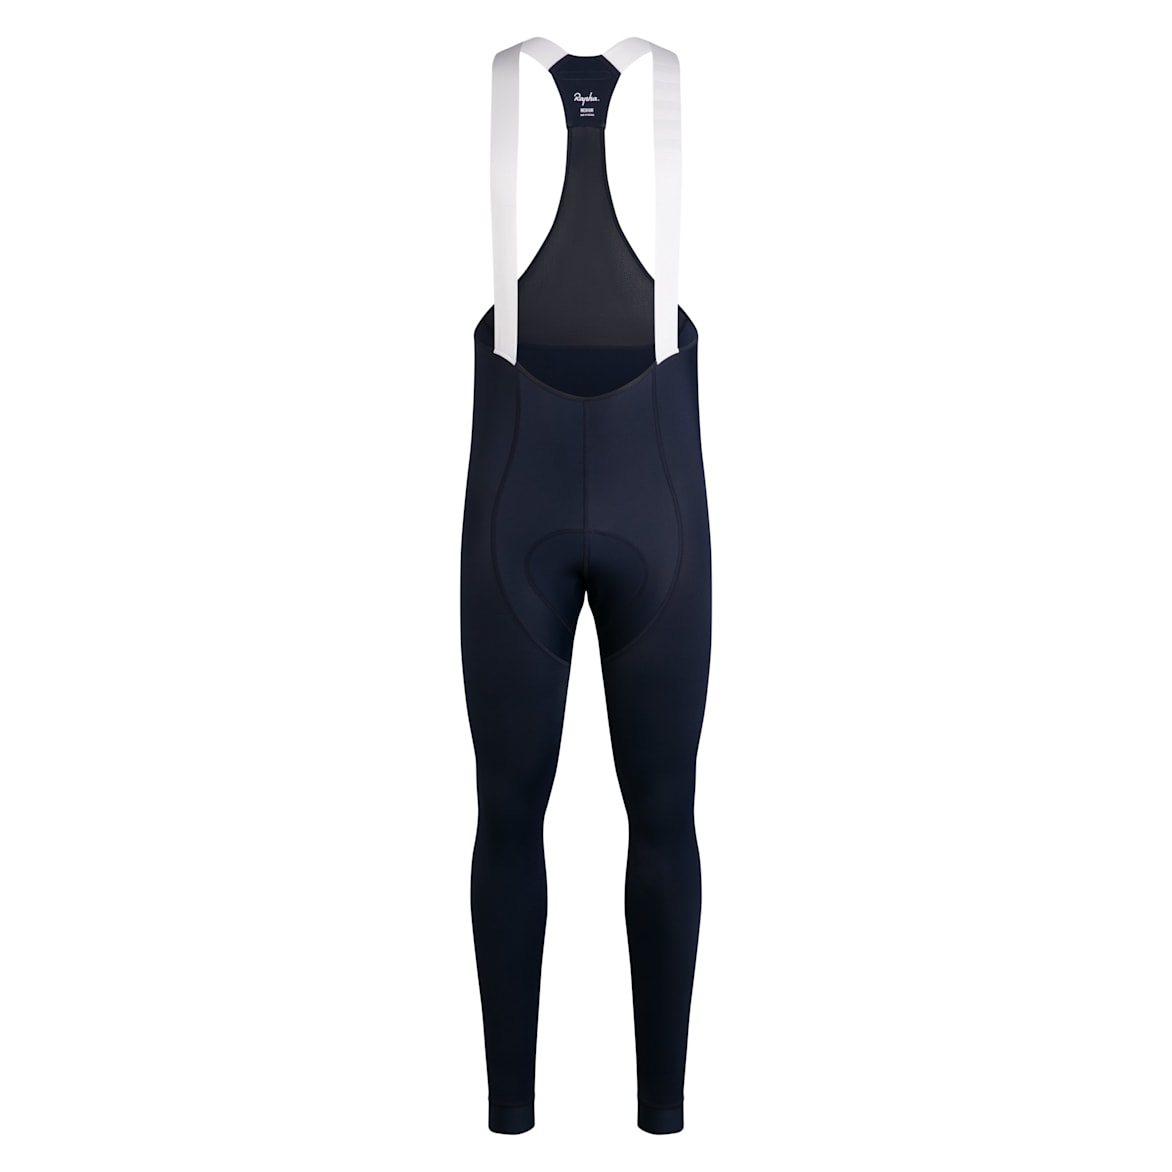 Men's Pro Team Training Tights with Pad